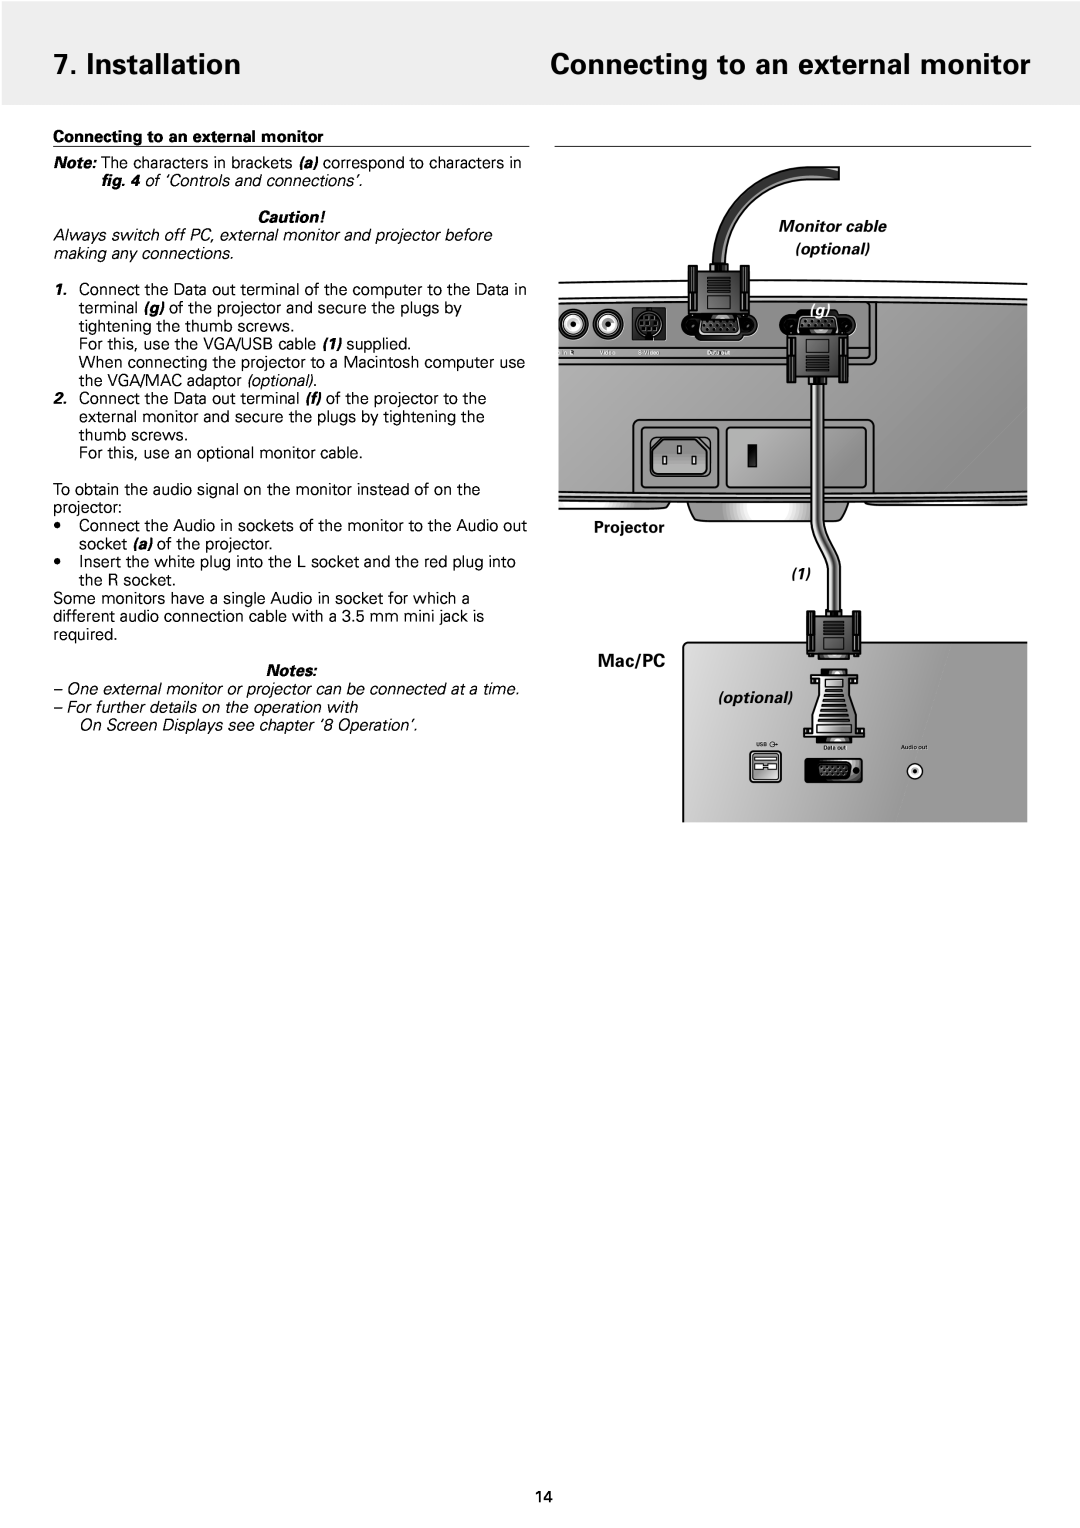 Philips 1 manual Connecting to an external monitor, Installation, Monitor cable optional, Projector 